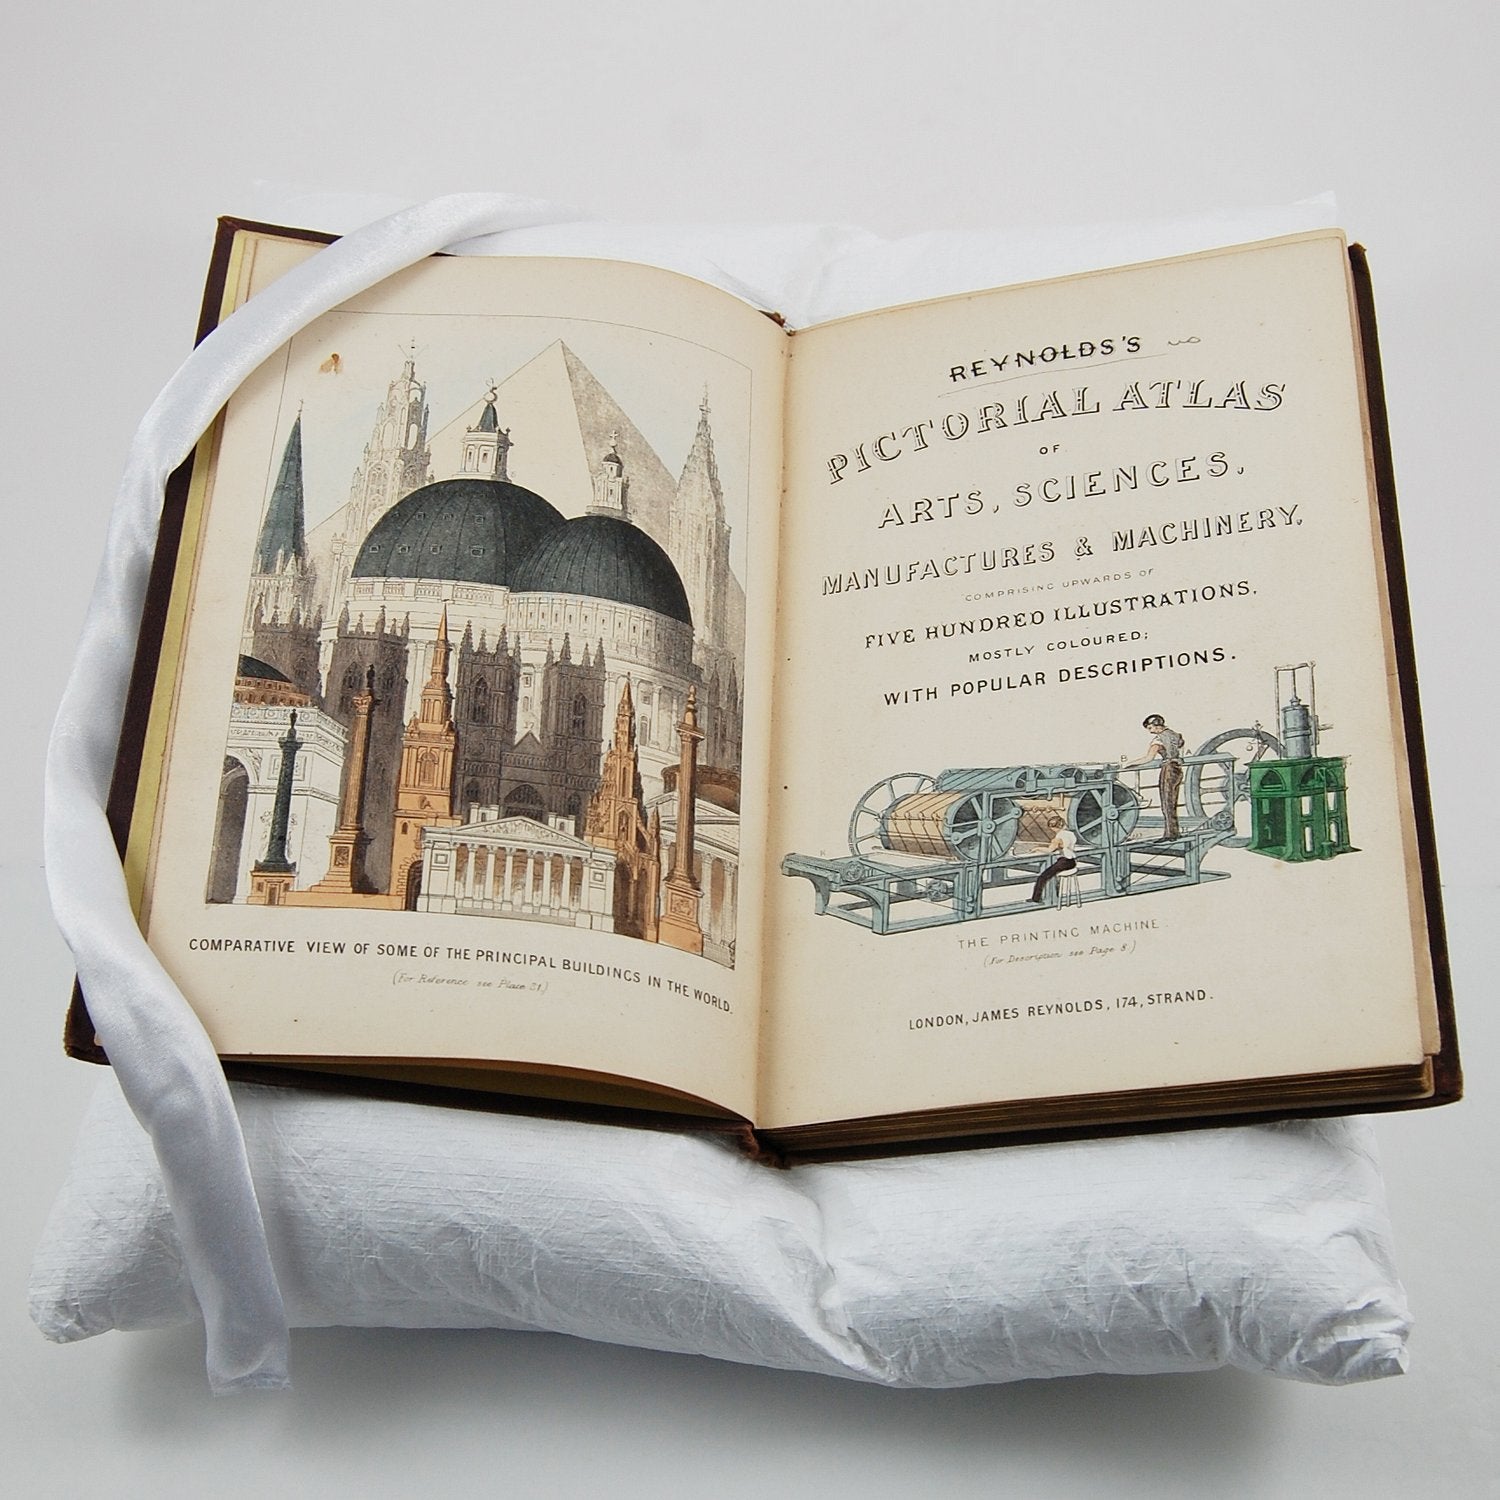 Victorian Infographics: Reynolds's Pictorial Atlas of Arts, Sciences, Manufactures, & Machinery